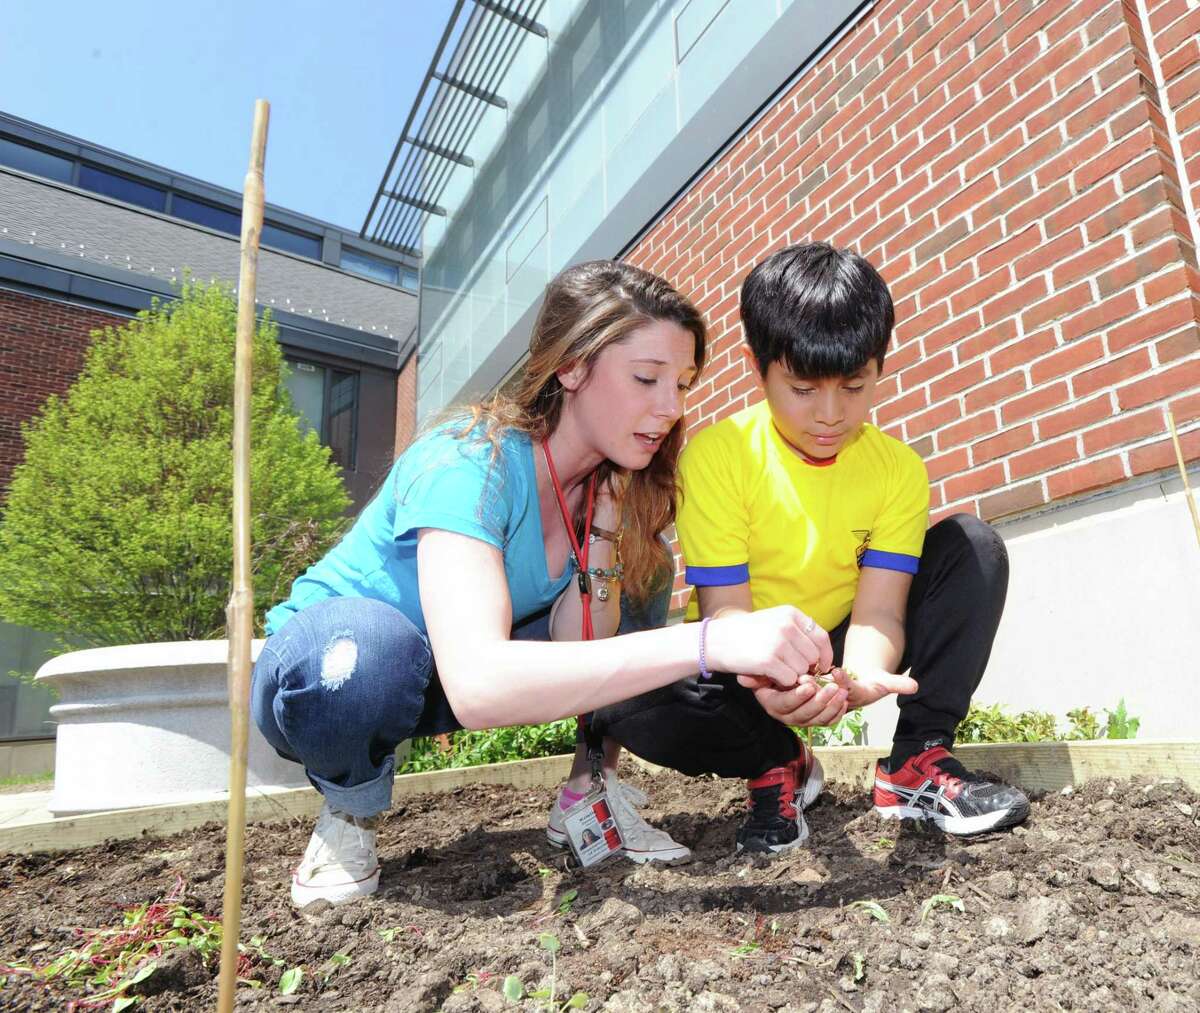 Hamilton Avenue School second-grade teacher Kristin Zizzamia, left, shows a beet plant seedlig to her student Randy Barreto, 7, in the garden at Hamilton Avenue School in Greenwich, Conn., Friday afternoon, April 28, 2017. School officials said the produce from the garden will be donated to Neighbor to Neighbor, a non-profit organization dedicated to serving residents in need.